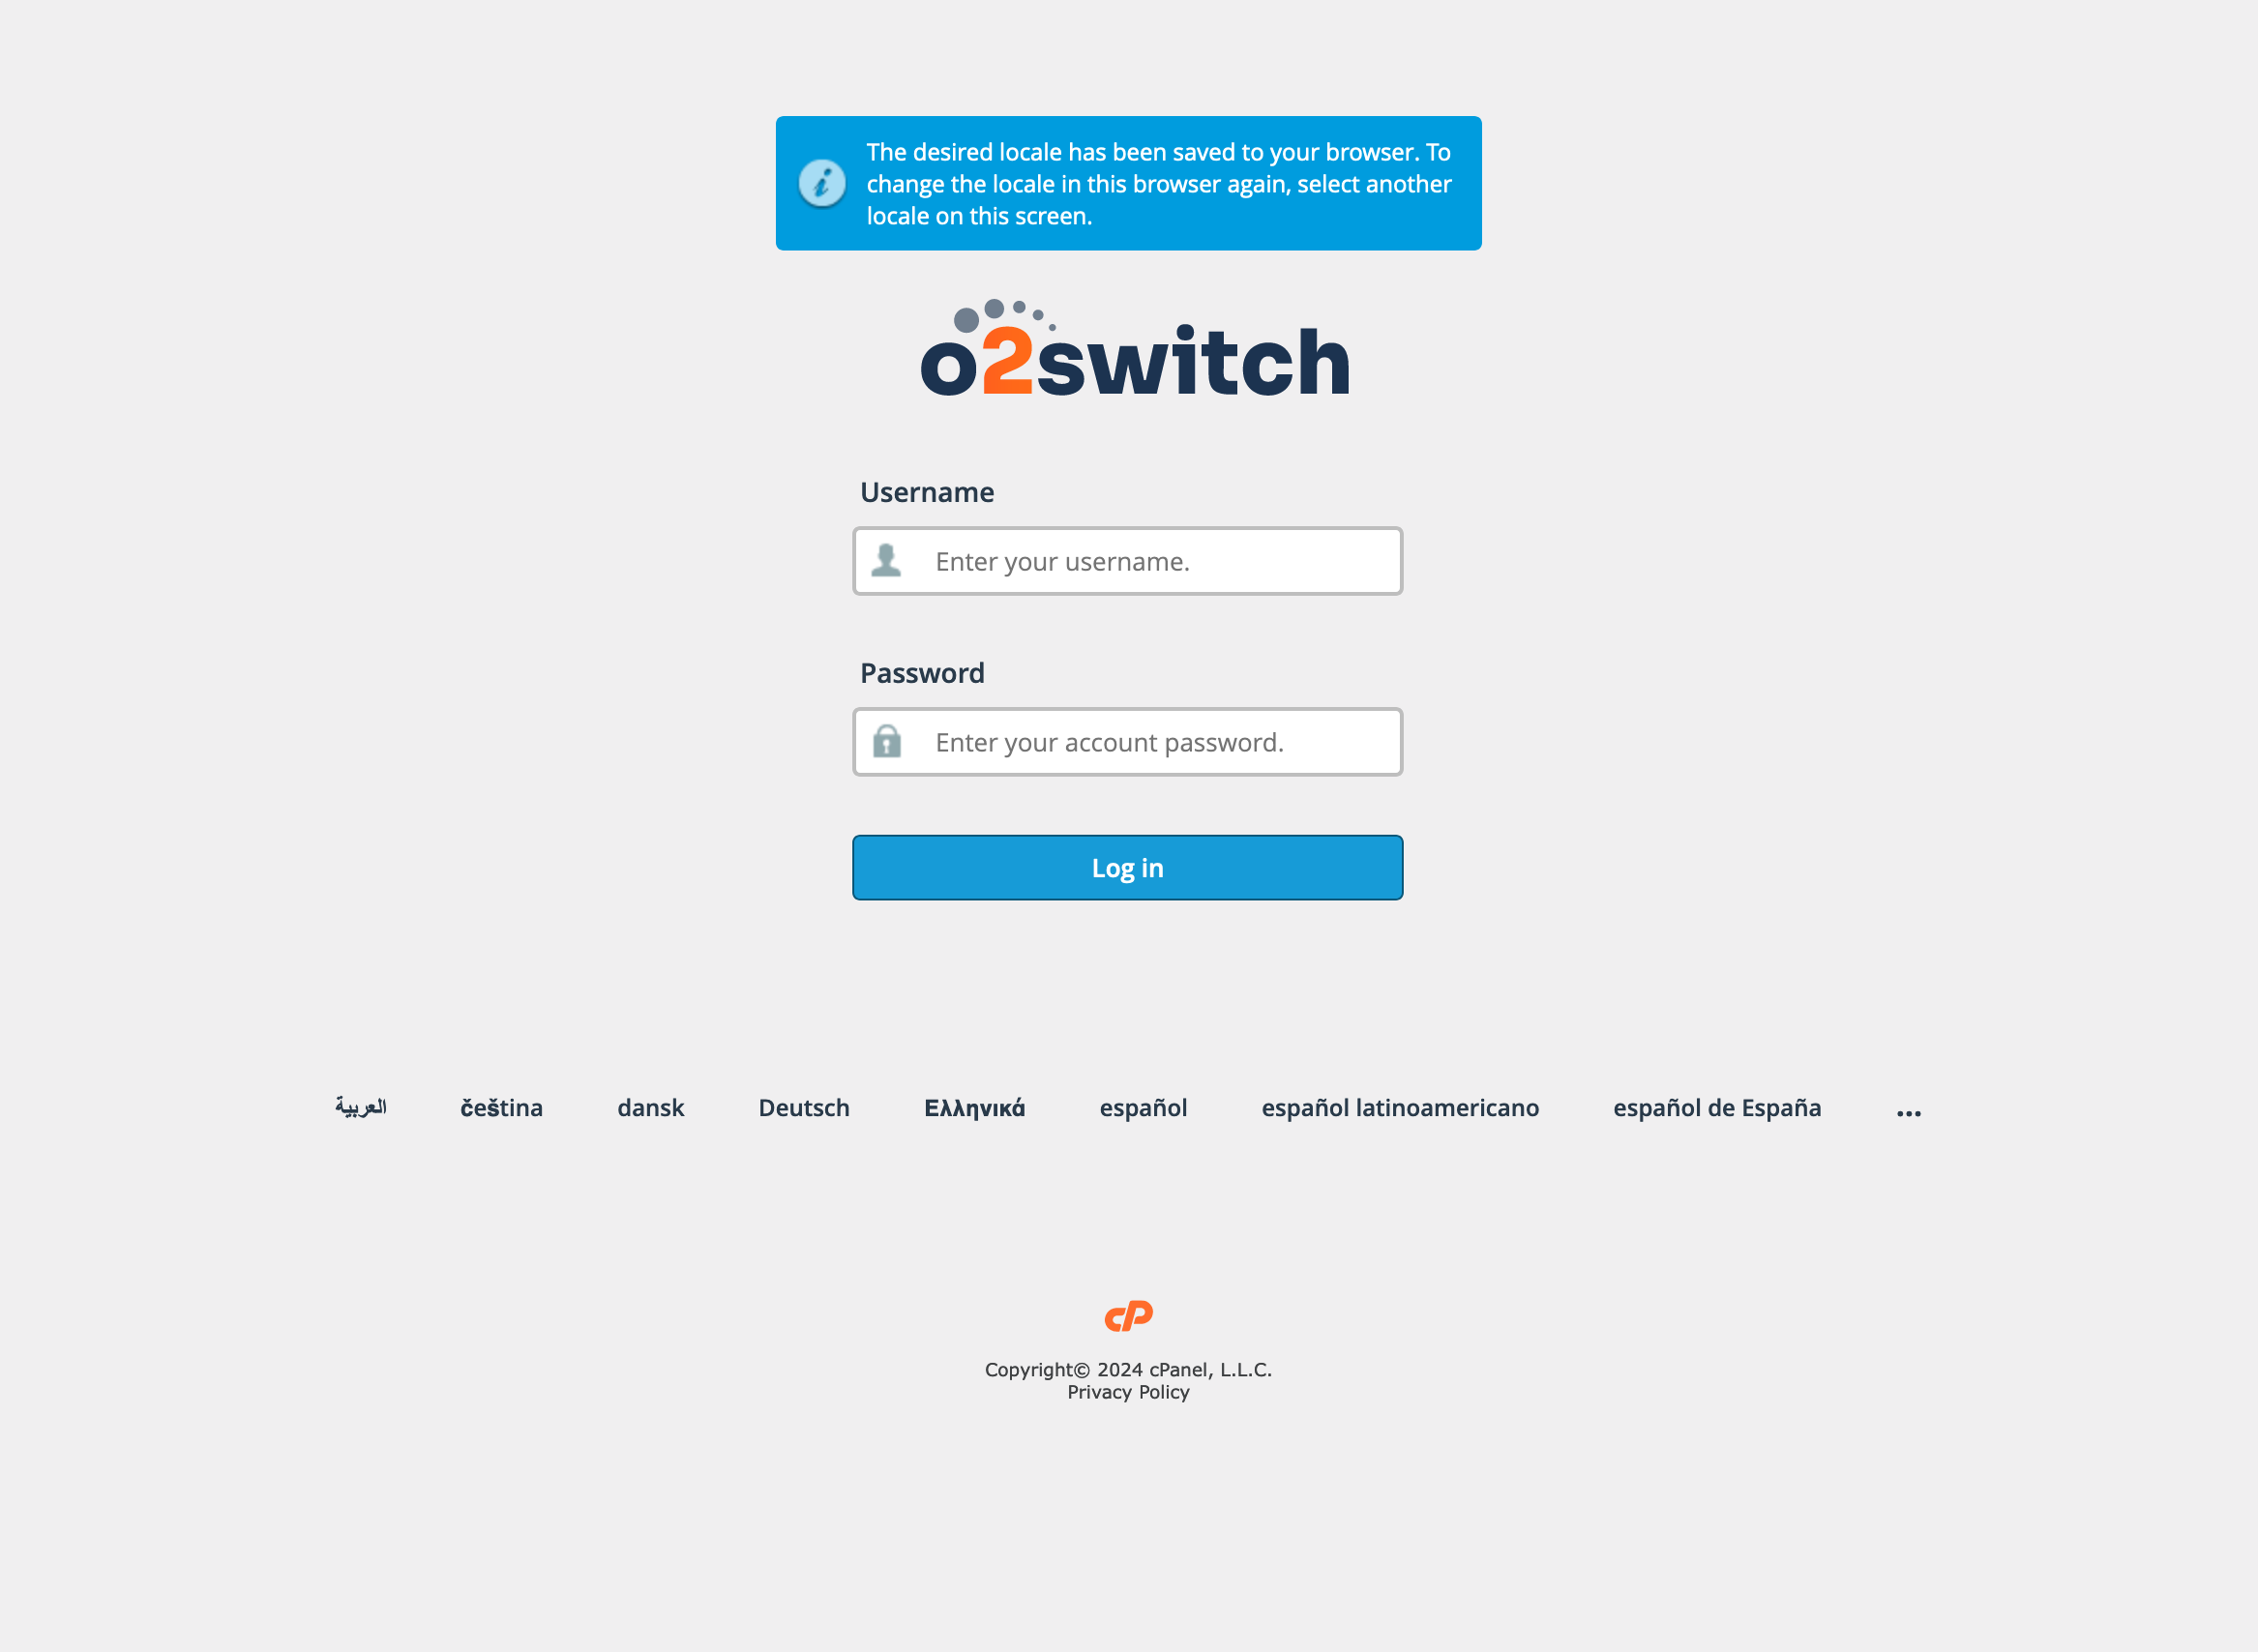 The login page for o2switch.